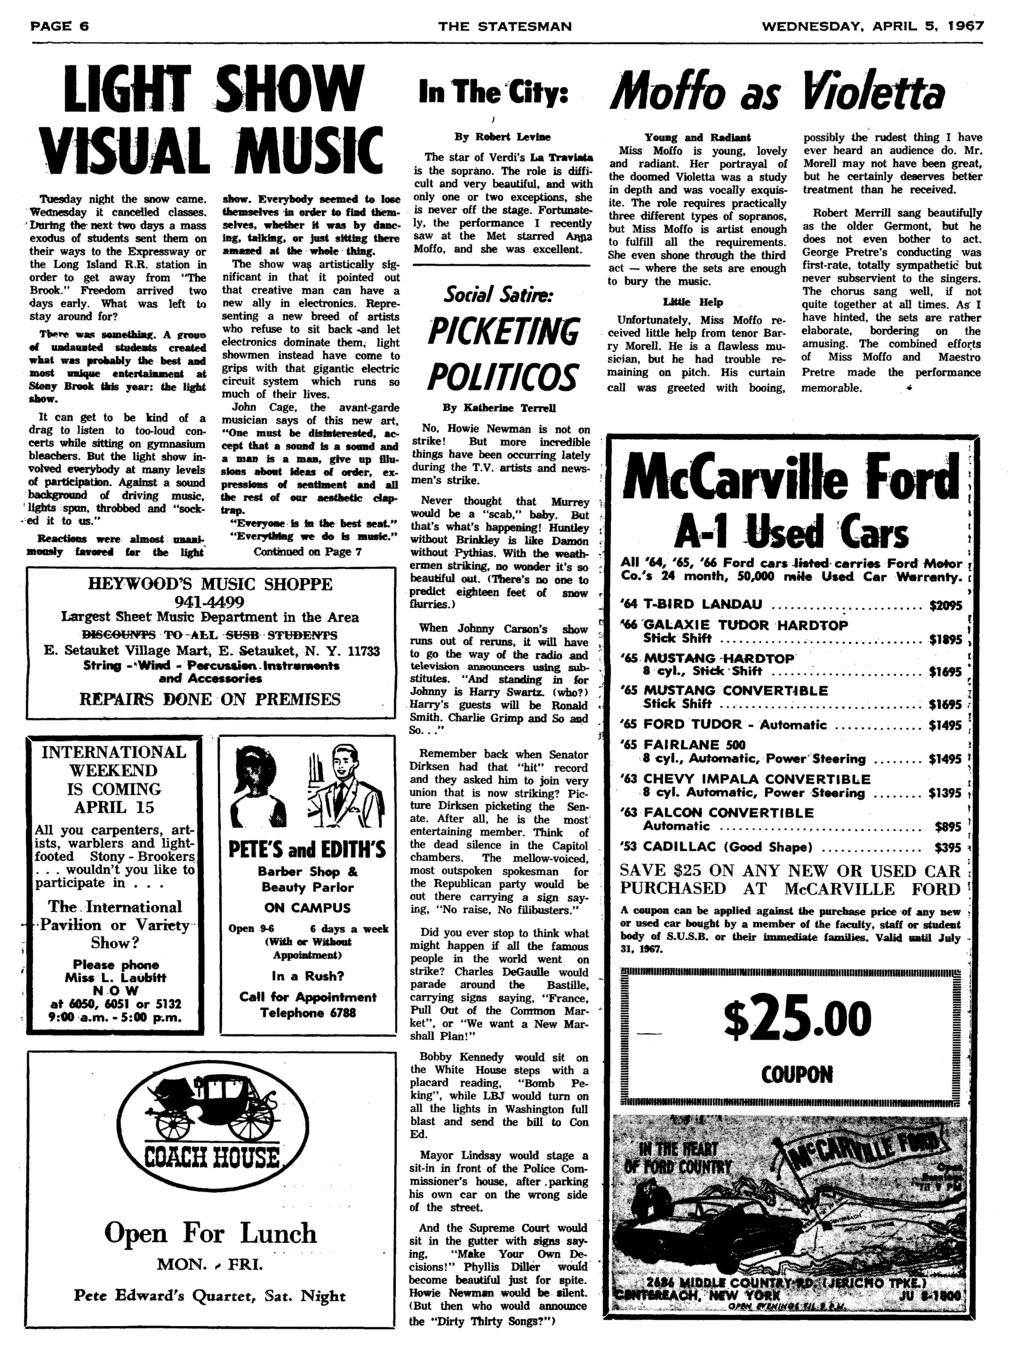 = PAGE 6 THE STATESMAN WEDNESDAY, APRL 5, 1967 LGHT SHOW VSUAL MUSC Tuesday ngh he snow came. Wednesday cancelled classes.